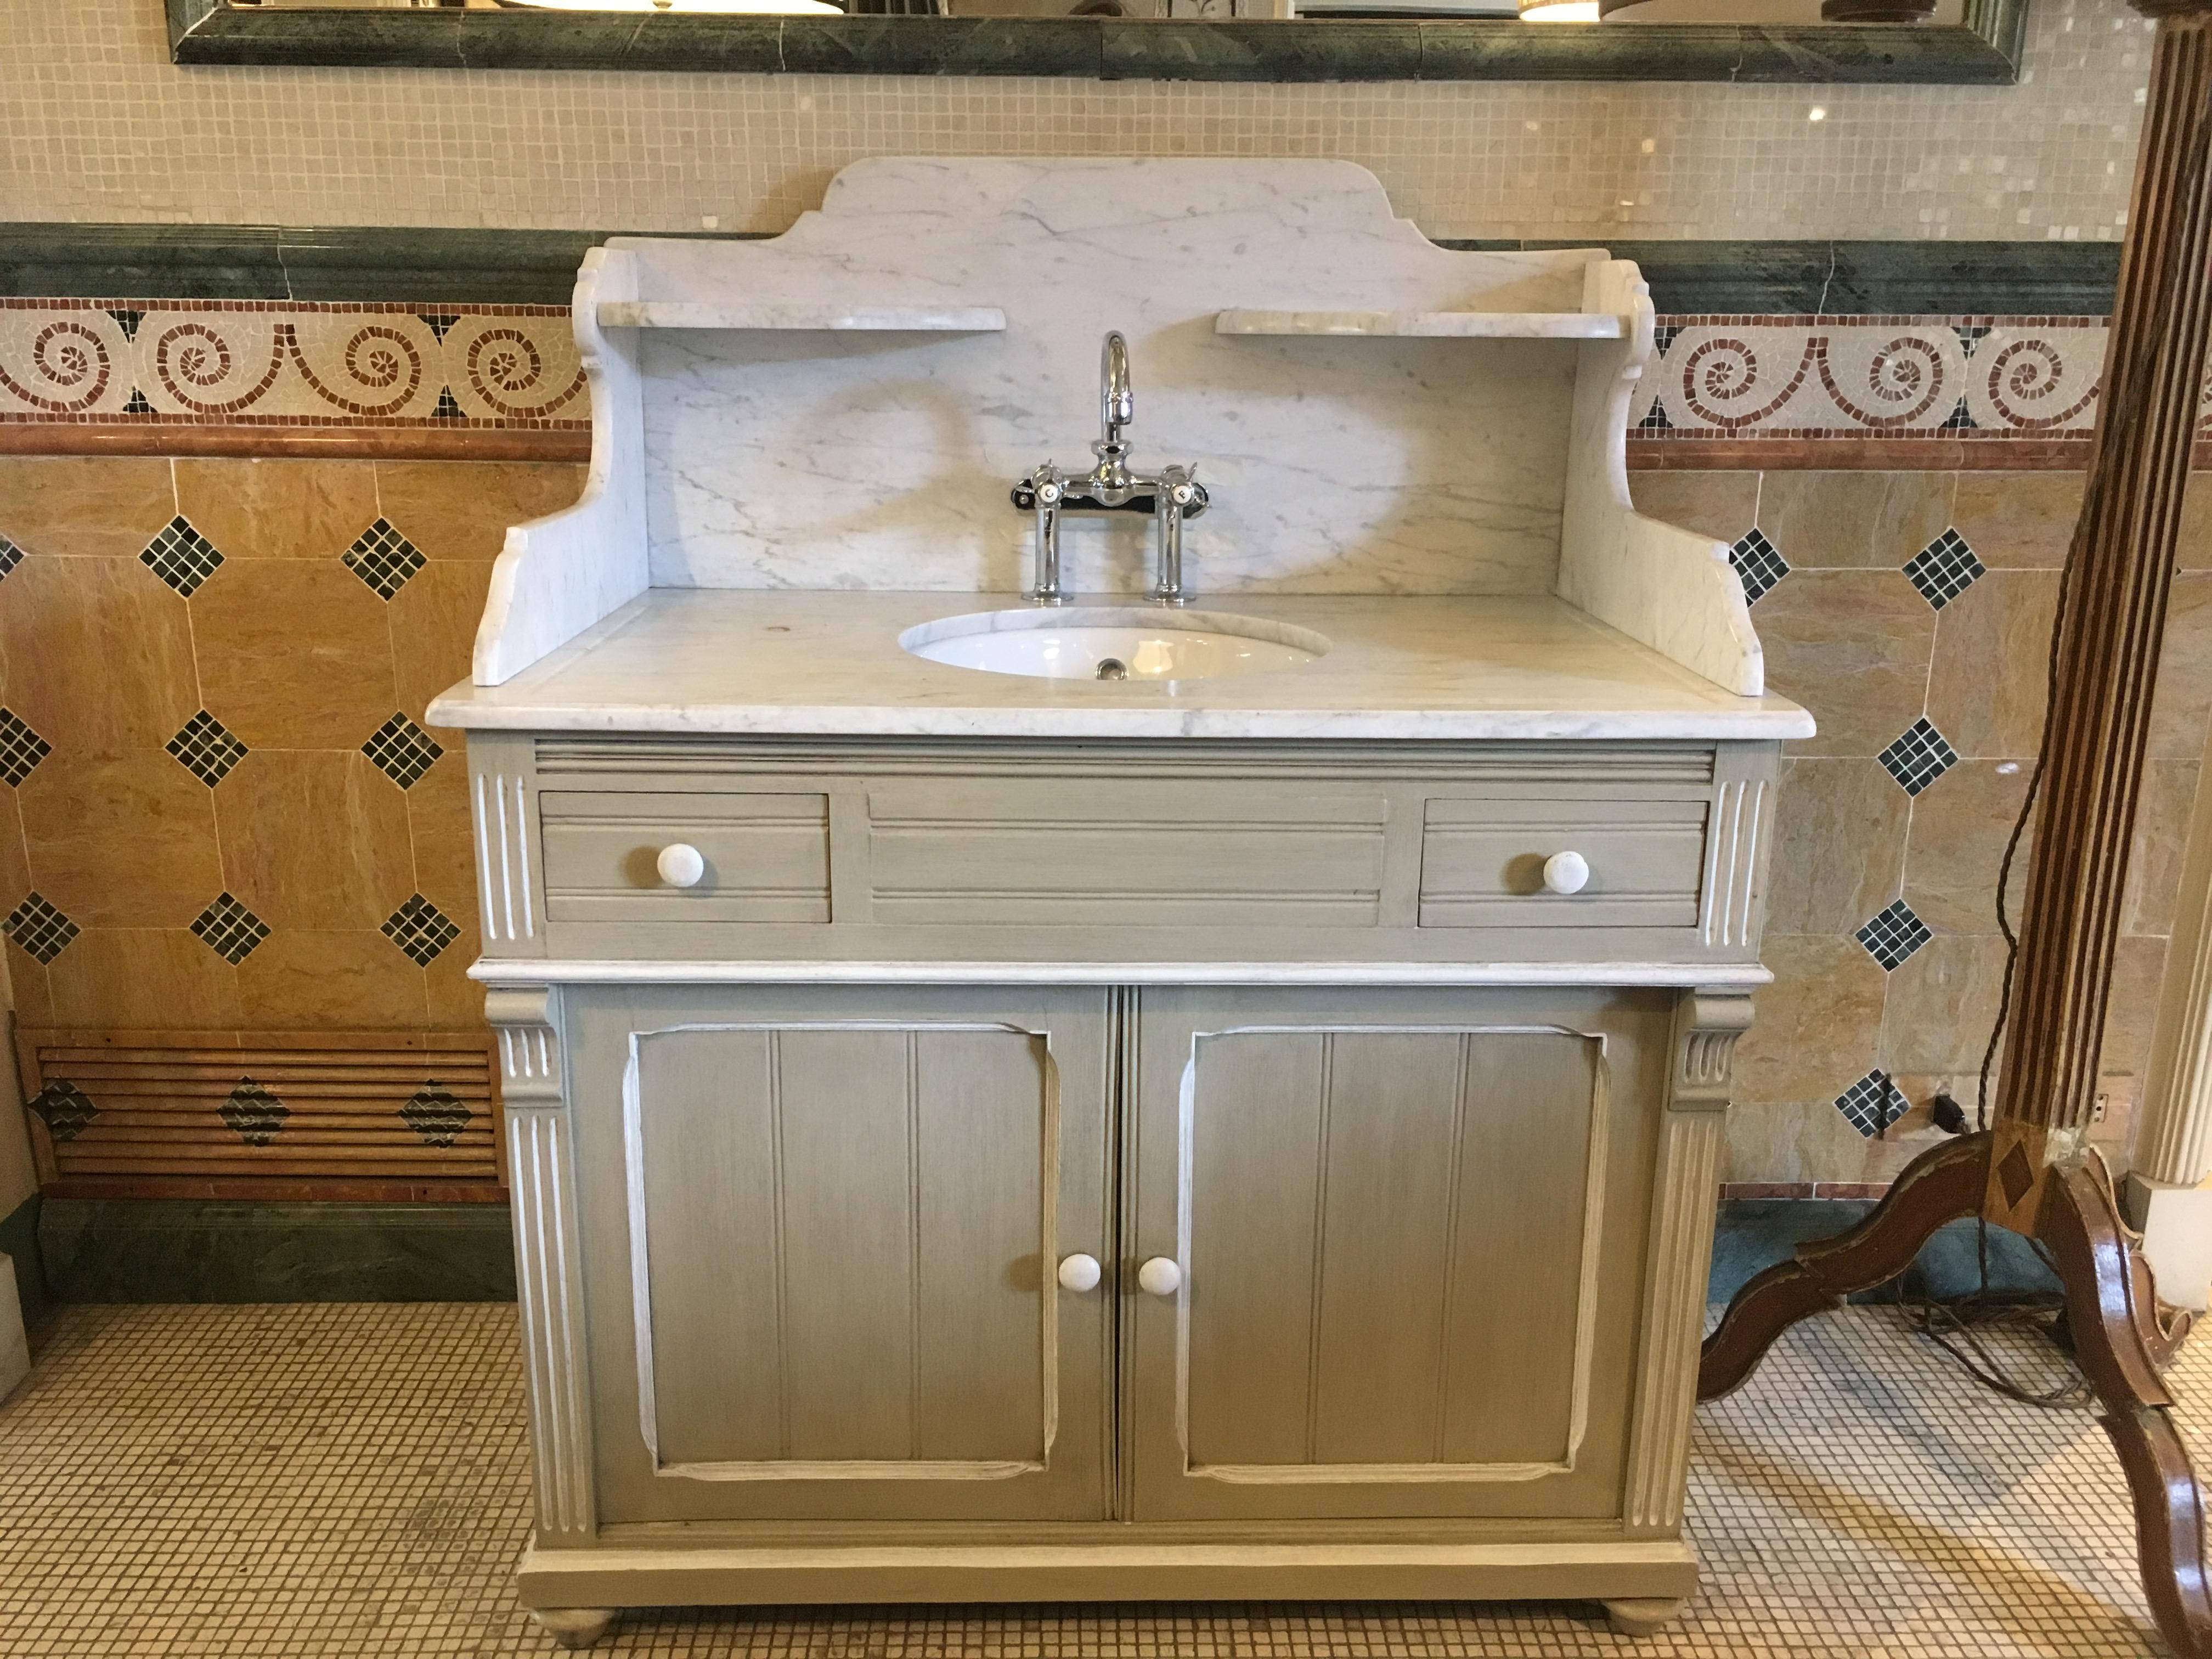 19th century French lacquered cupboard sink with Carrara marble top, 1890s.
This cupboard sink comes with its original restored nickel faucet.